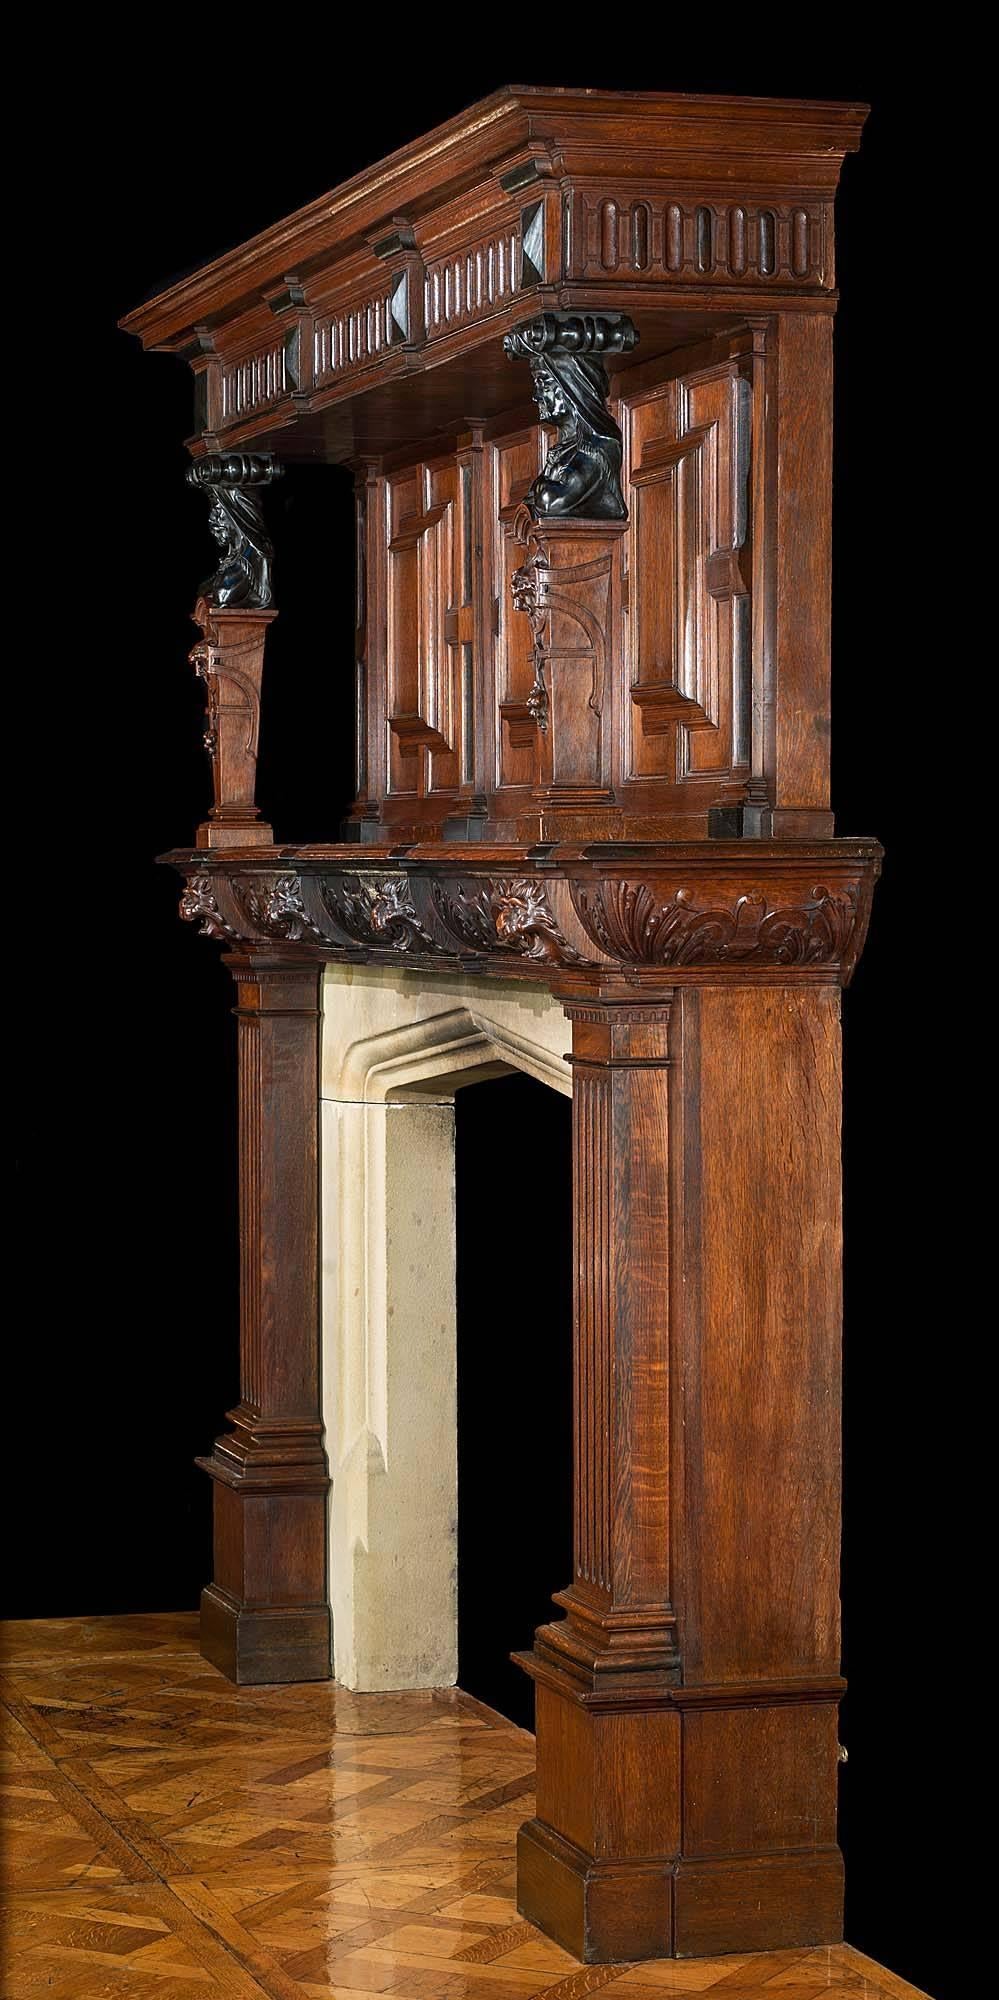 A large antique Jacobean style carved oak chimneypiece and overmantle. The strap work barrel frieze is divided by well carved lion masks, mirrored on the end blocks, above the simple fluted pilaster jambs with dental capitals, supported on tall